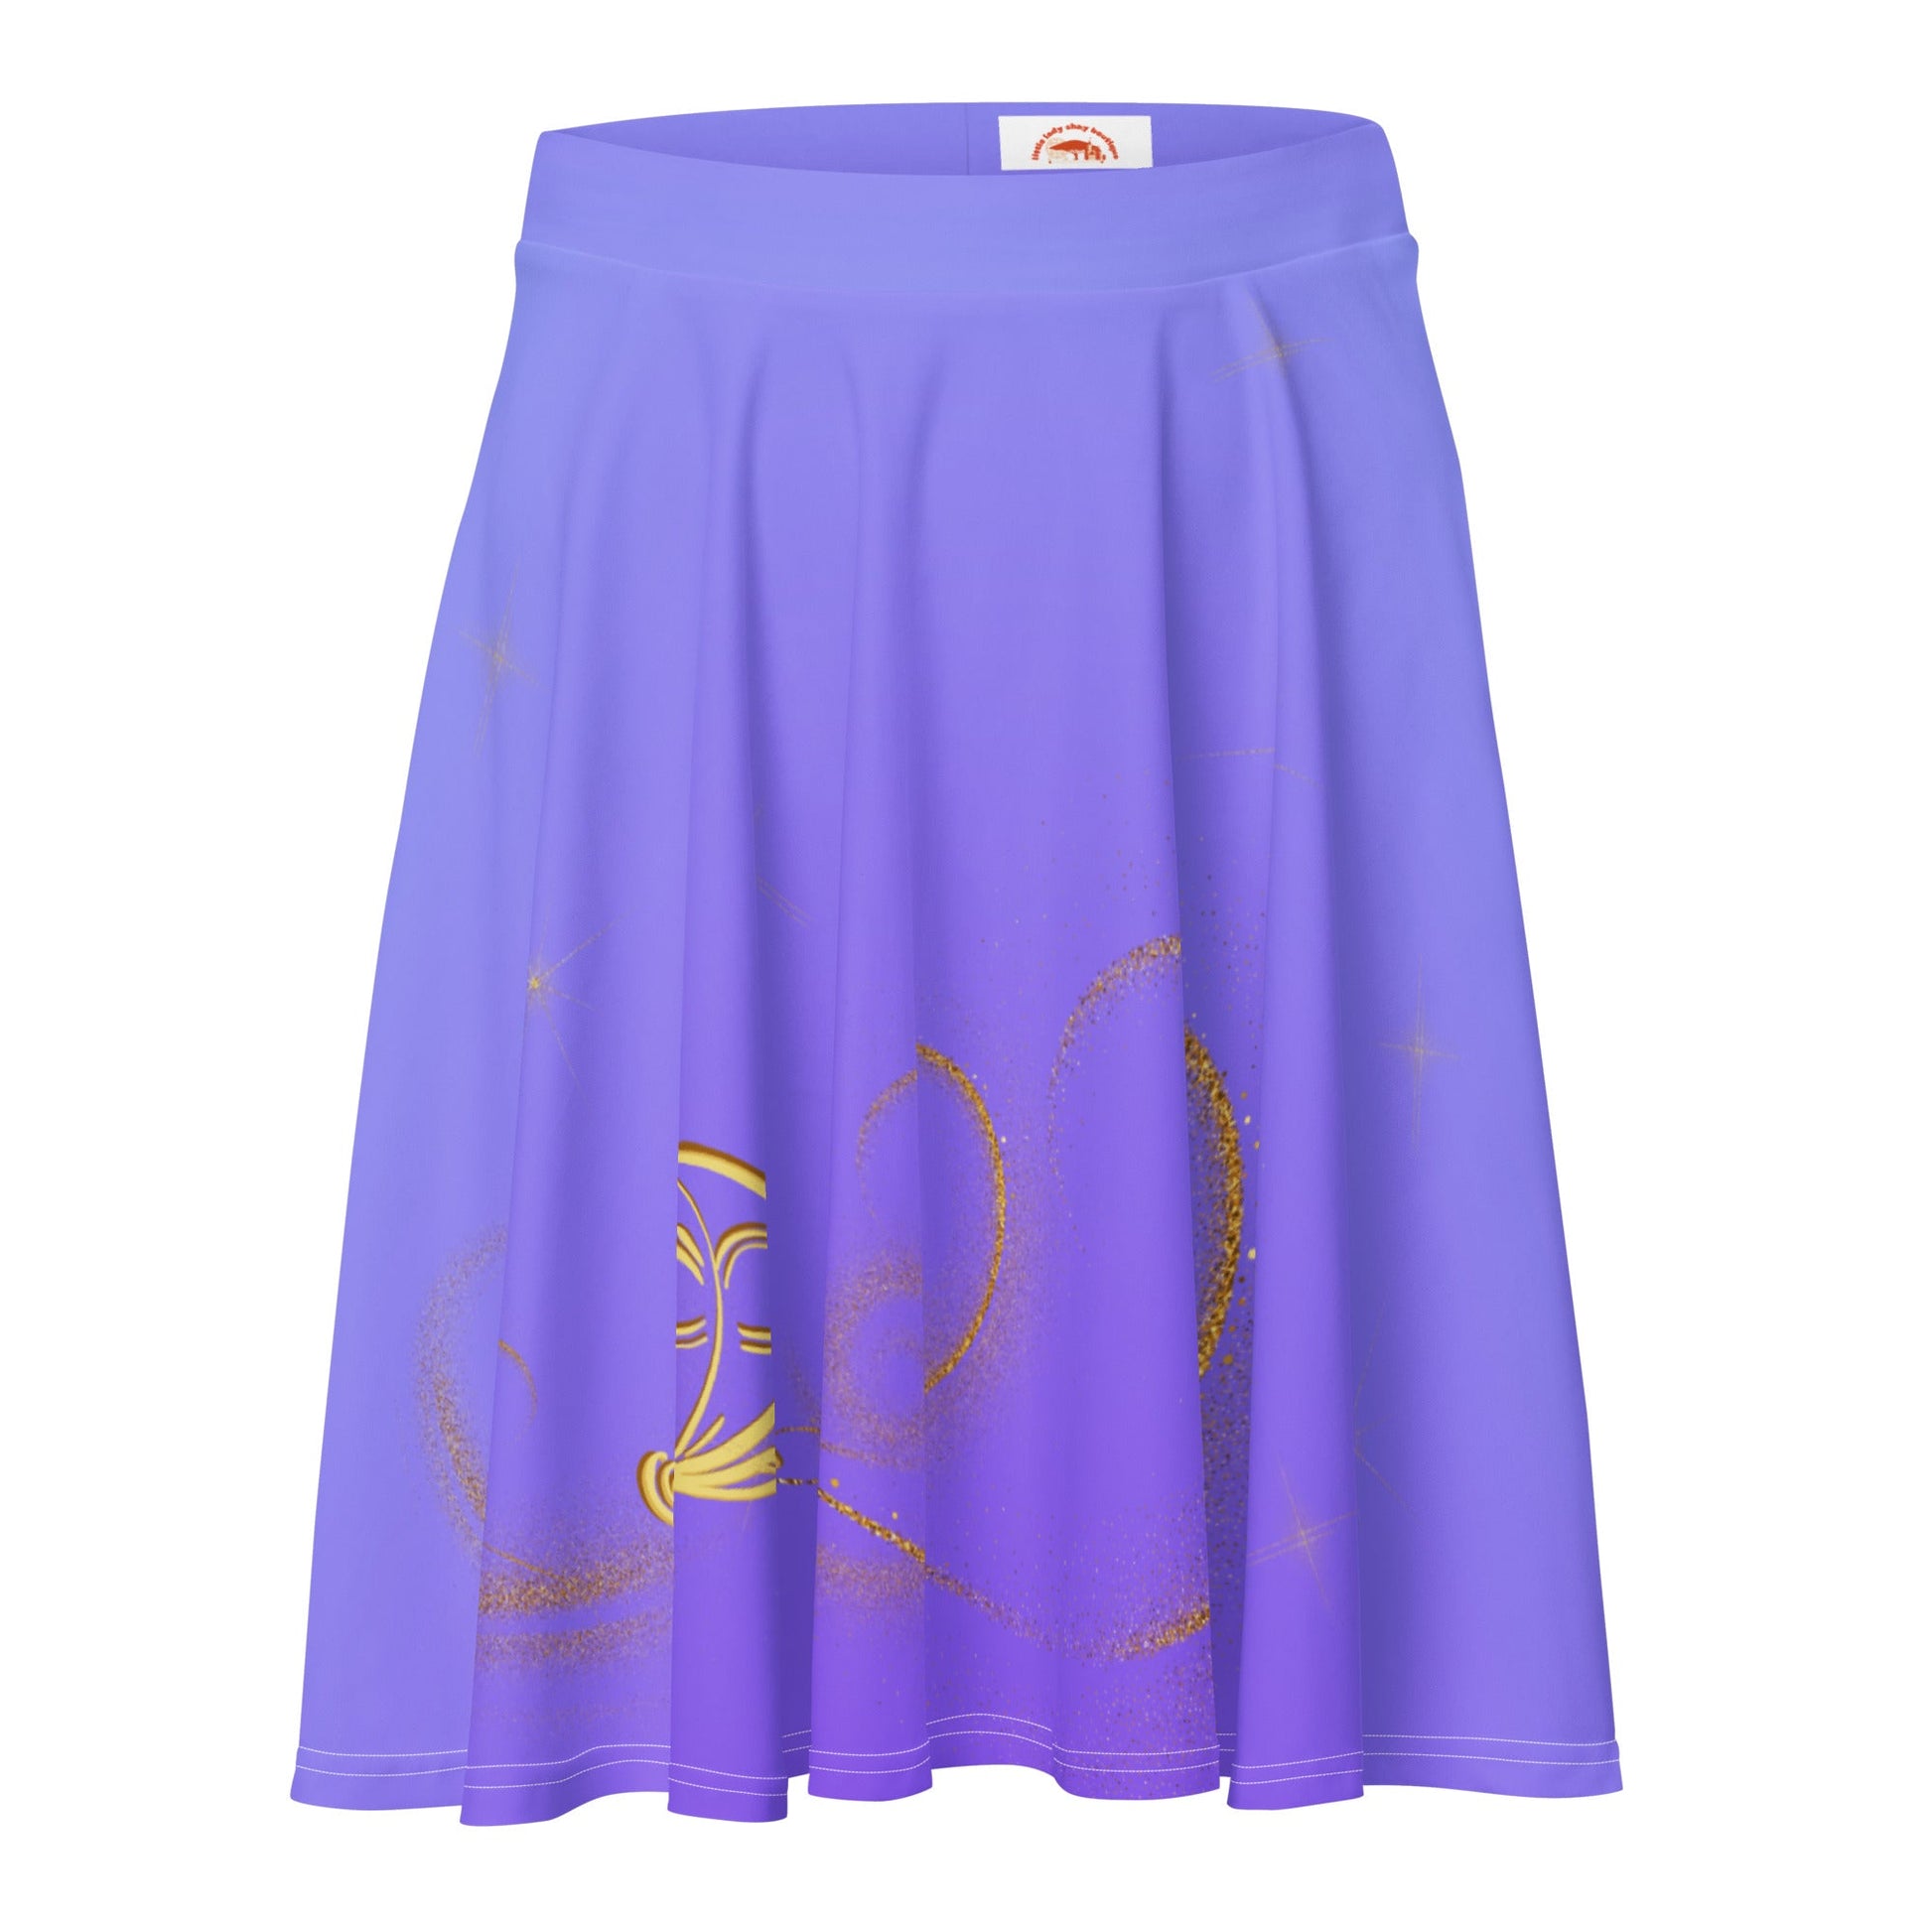 Magical Carriage Skater Skirt adult skirtcasual wearcinderella castle#tag4##tag5##tag6#